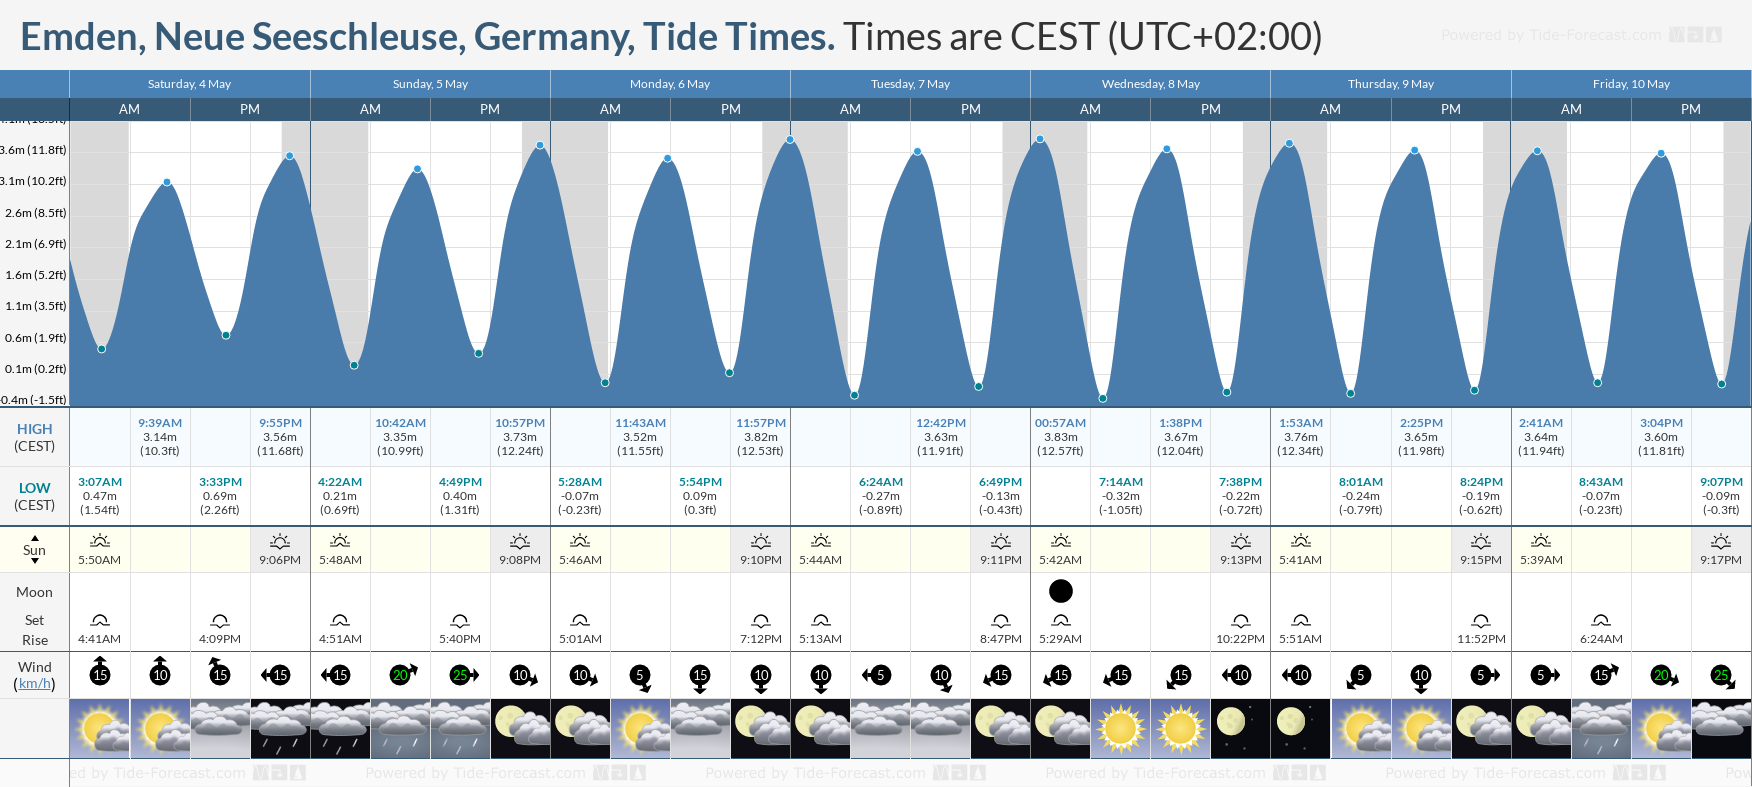 Emden, Neue Seeschleuse, Germany Tide Chart including high and low tide tide times for the next 7 days